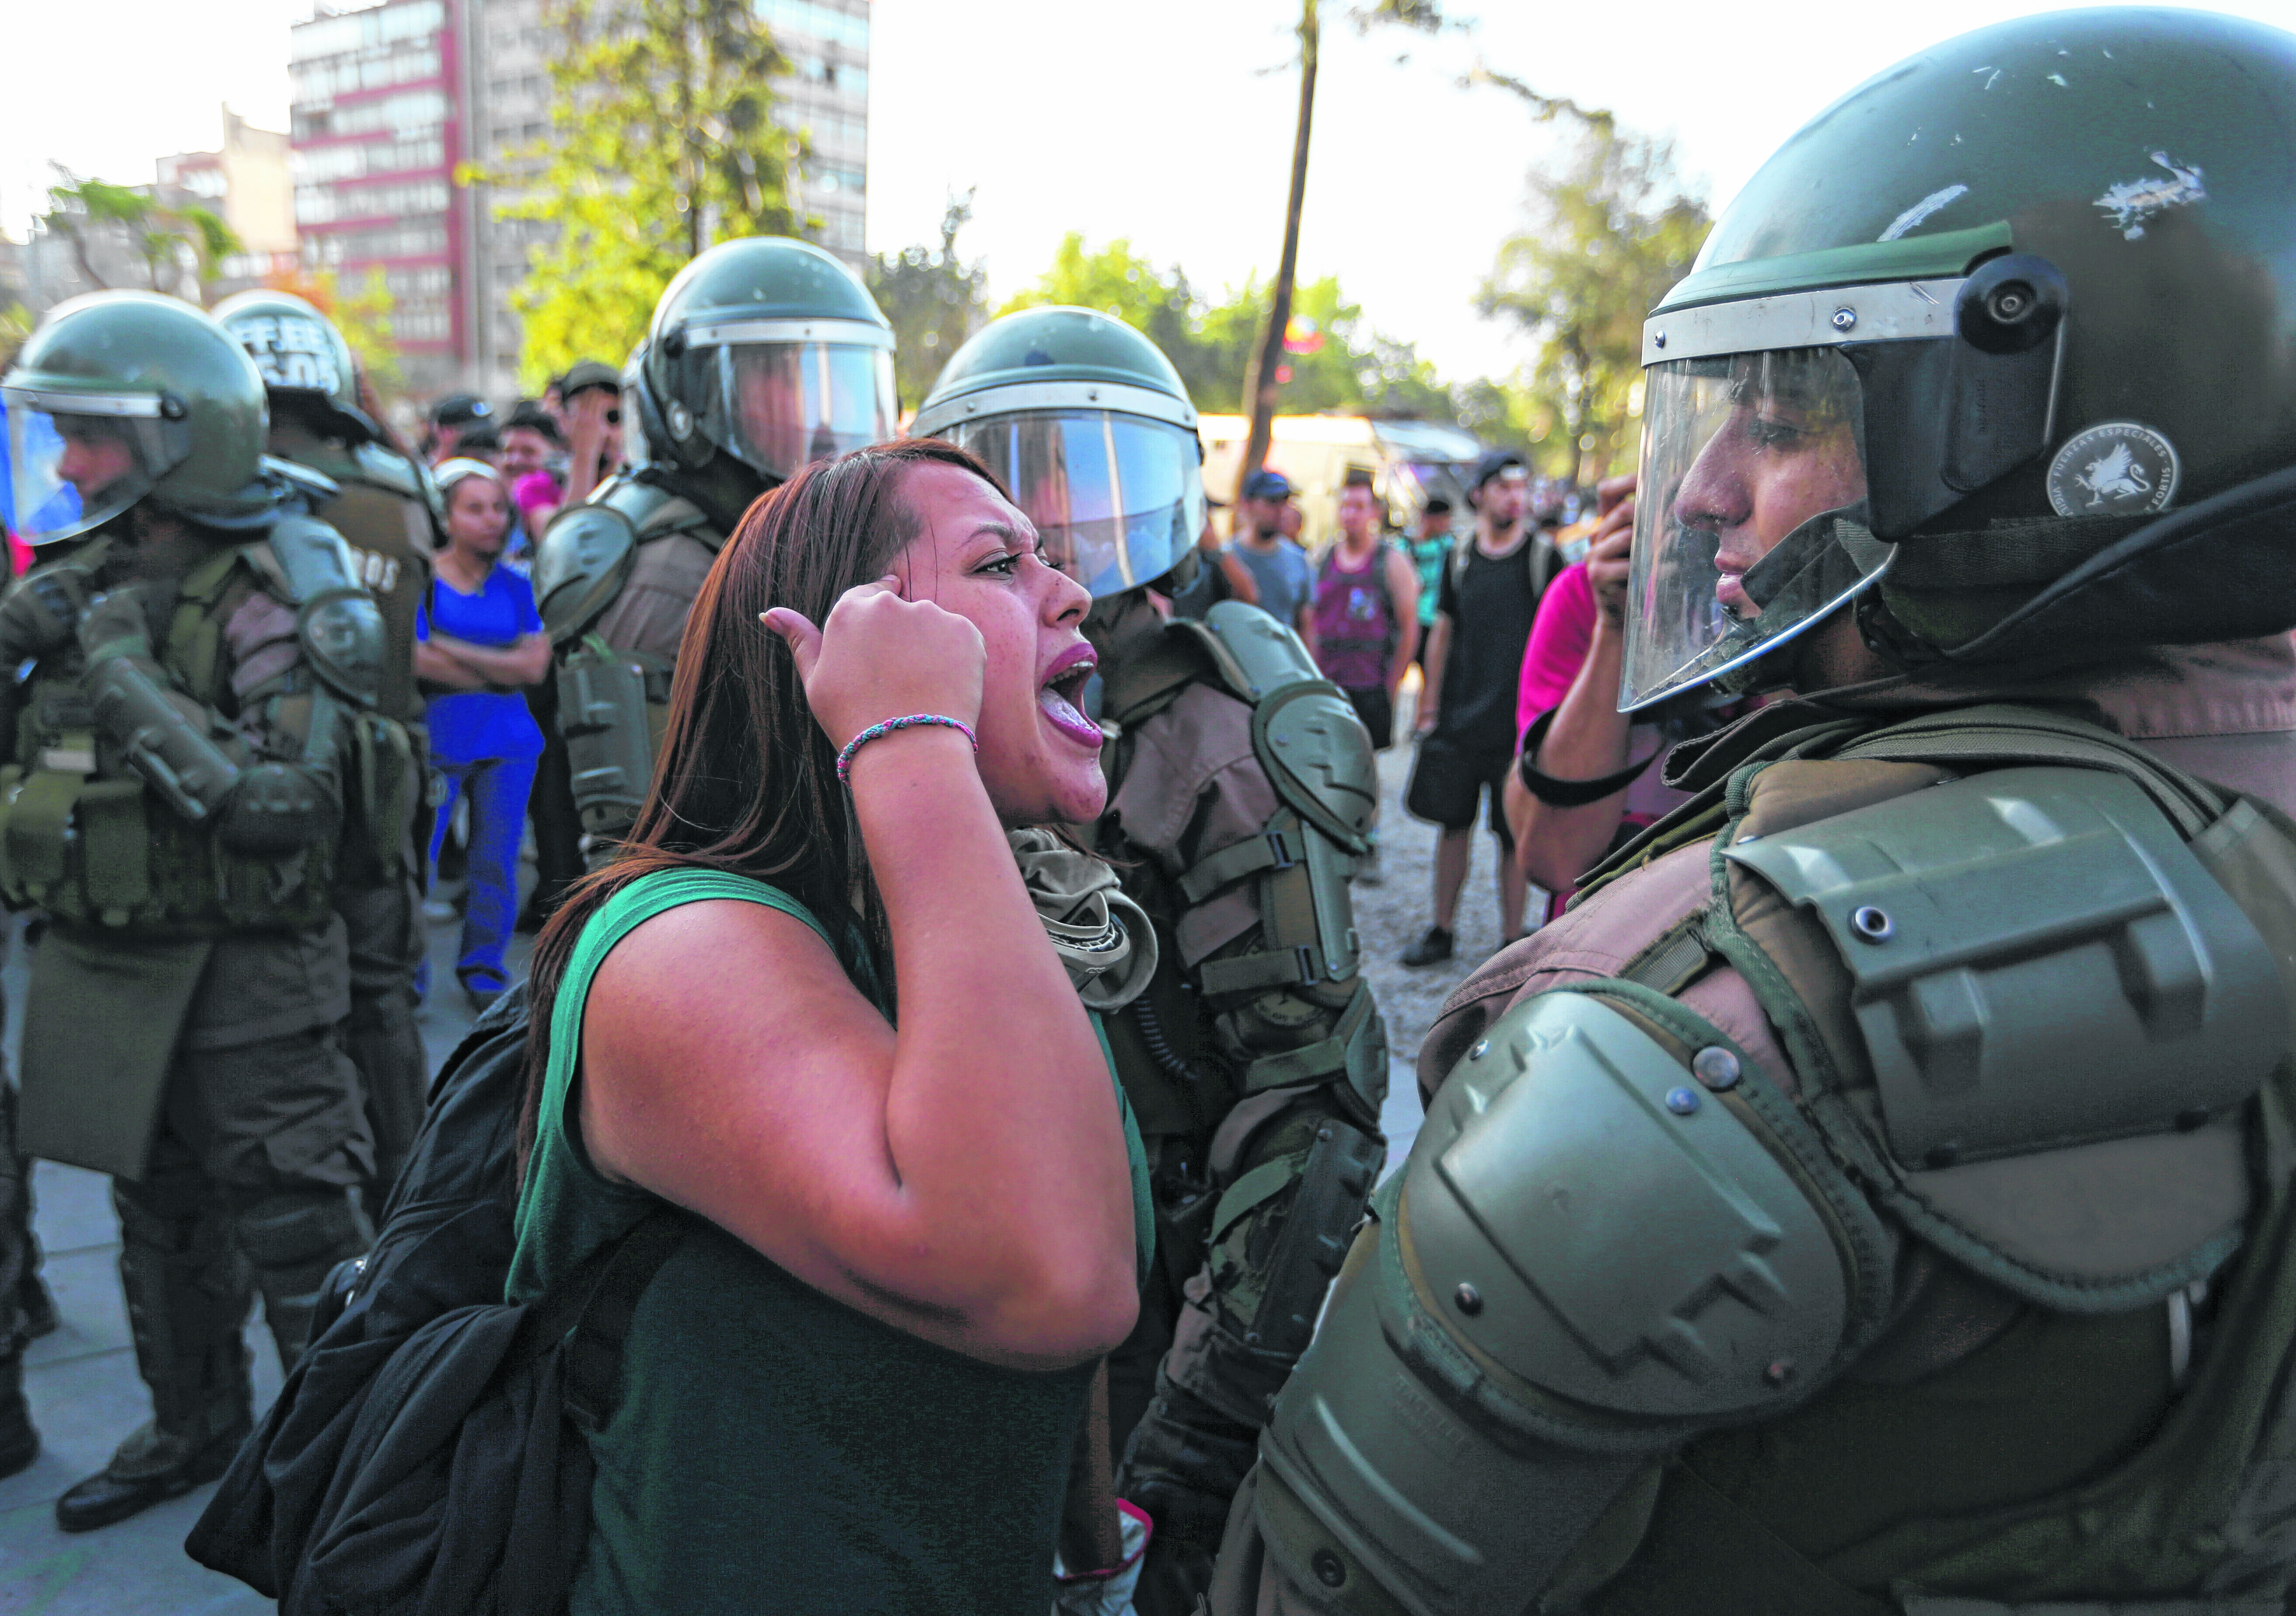 A demonstrator argues with an anti riot police officer during a protest in Santiago, Chile, Monday, Dec. 9, 2019. Student protests have become a nationwide call for socio-economic equality and better social services, so far forcing Chilean President Sebastian Pinera to increase benefits for the poor and disadvantaged and start a process of constitutional reform. (AP Photo/Fernando Llano)